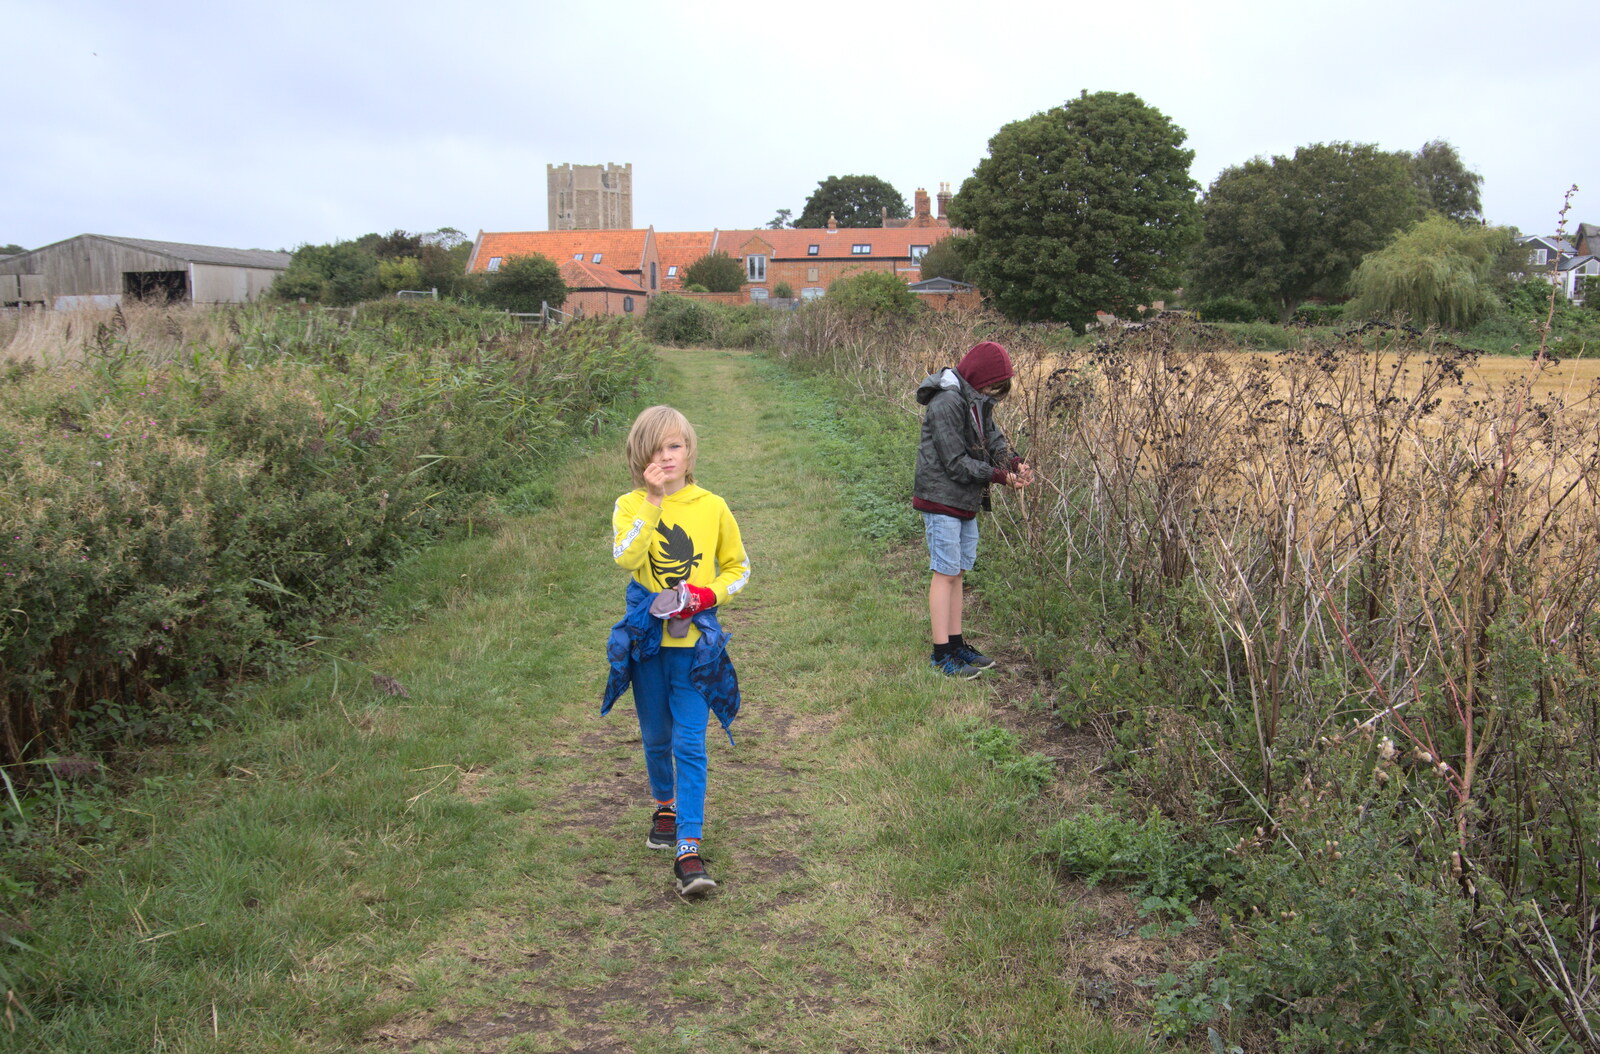 Harry on the path from A Trip to Orford, Suffolk - 29th August 2020